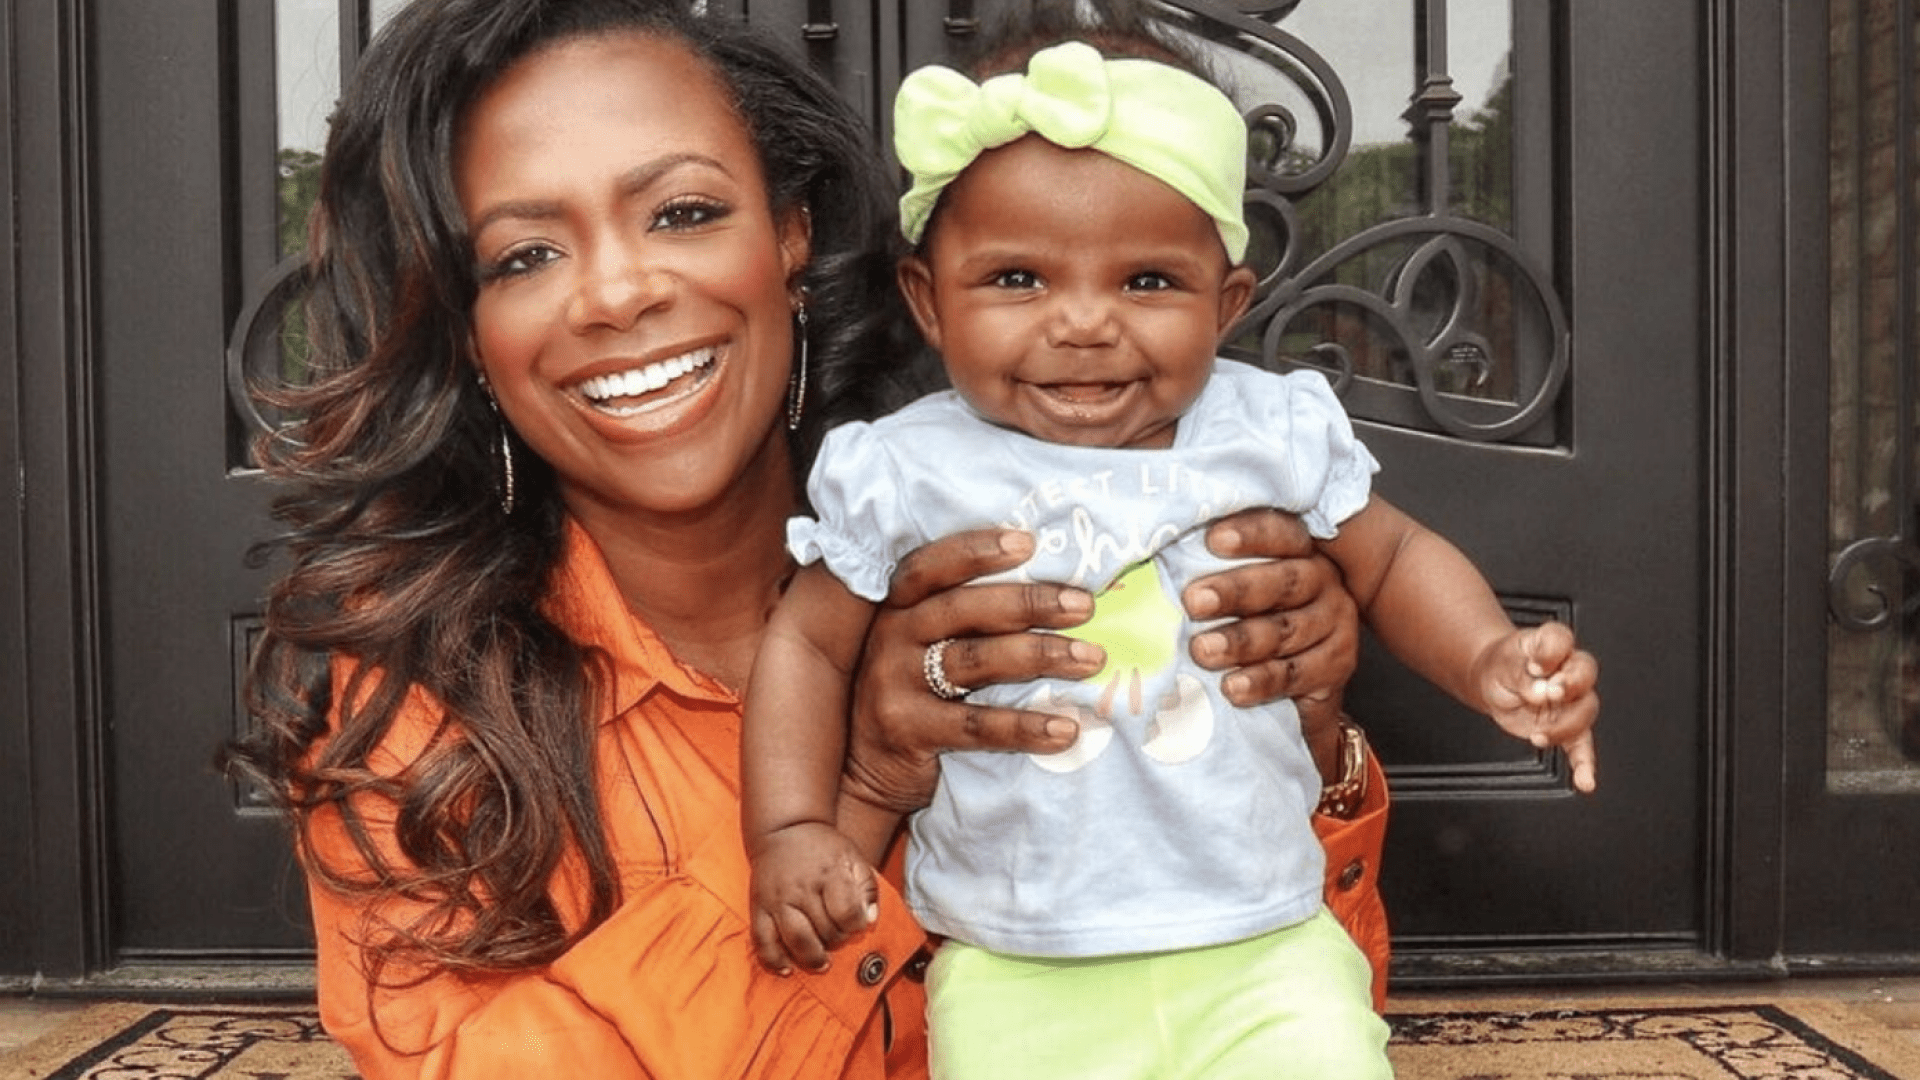 Kandi Burruss Shares New Jaw-Dropping Photos - Check Out Her Mesmerizing Pink Dress